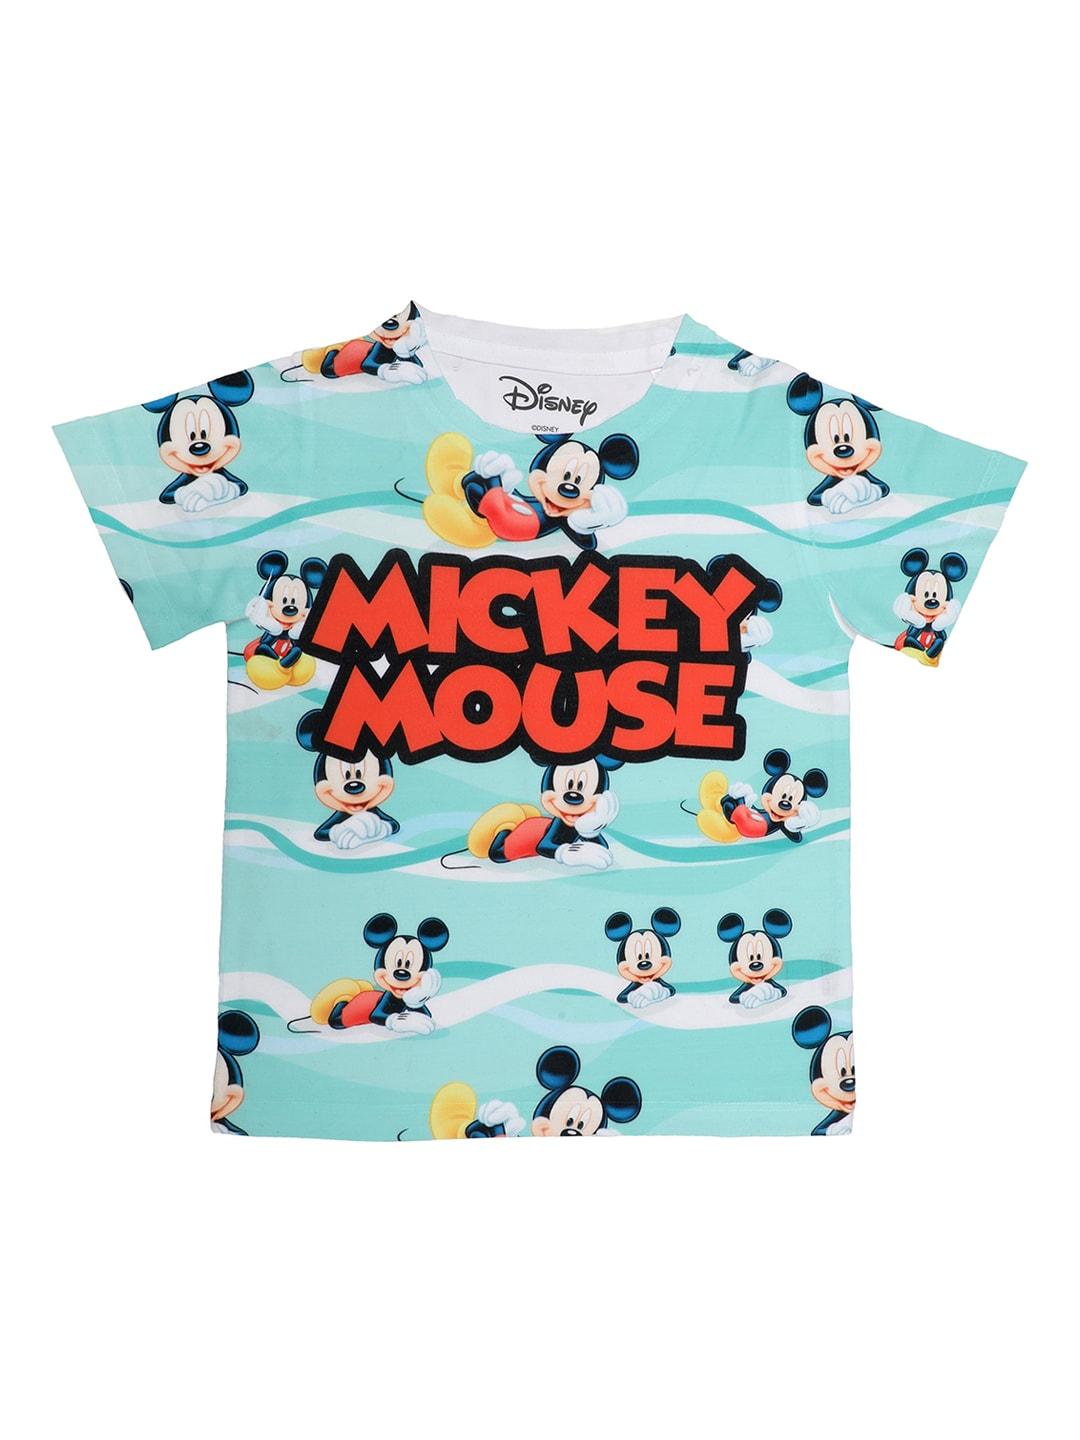 disney-by-wear-your-mind-boys-white-mickey-mouse-printed-round-neck-t-shirt